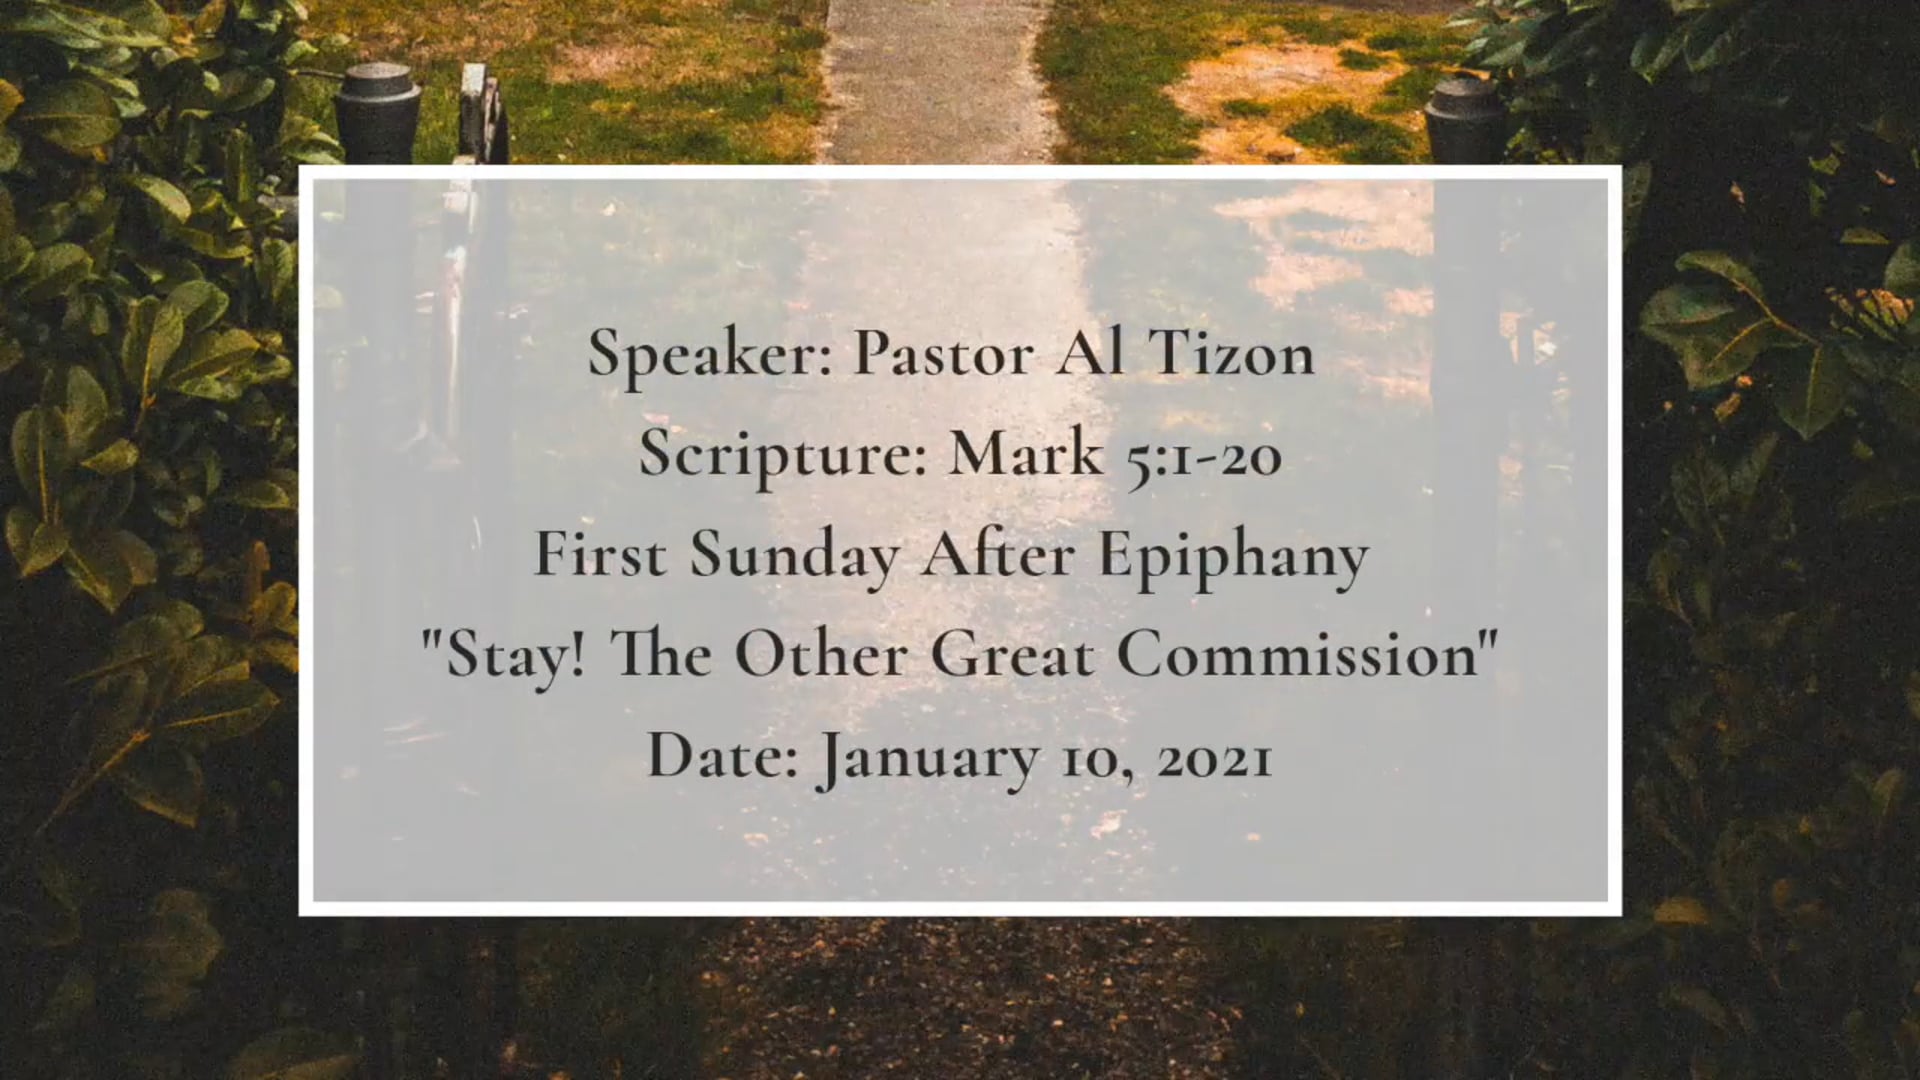 "Stay! The Other Great Commission" - Pastor Al Tizon